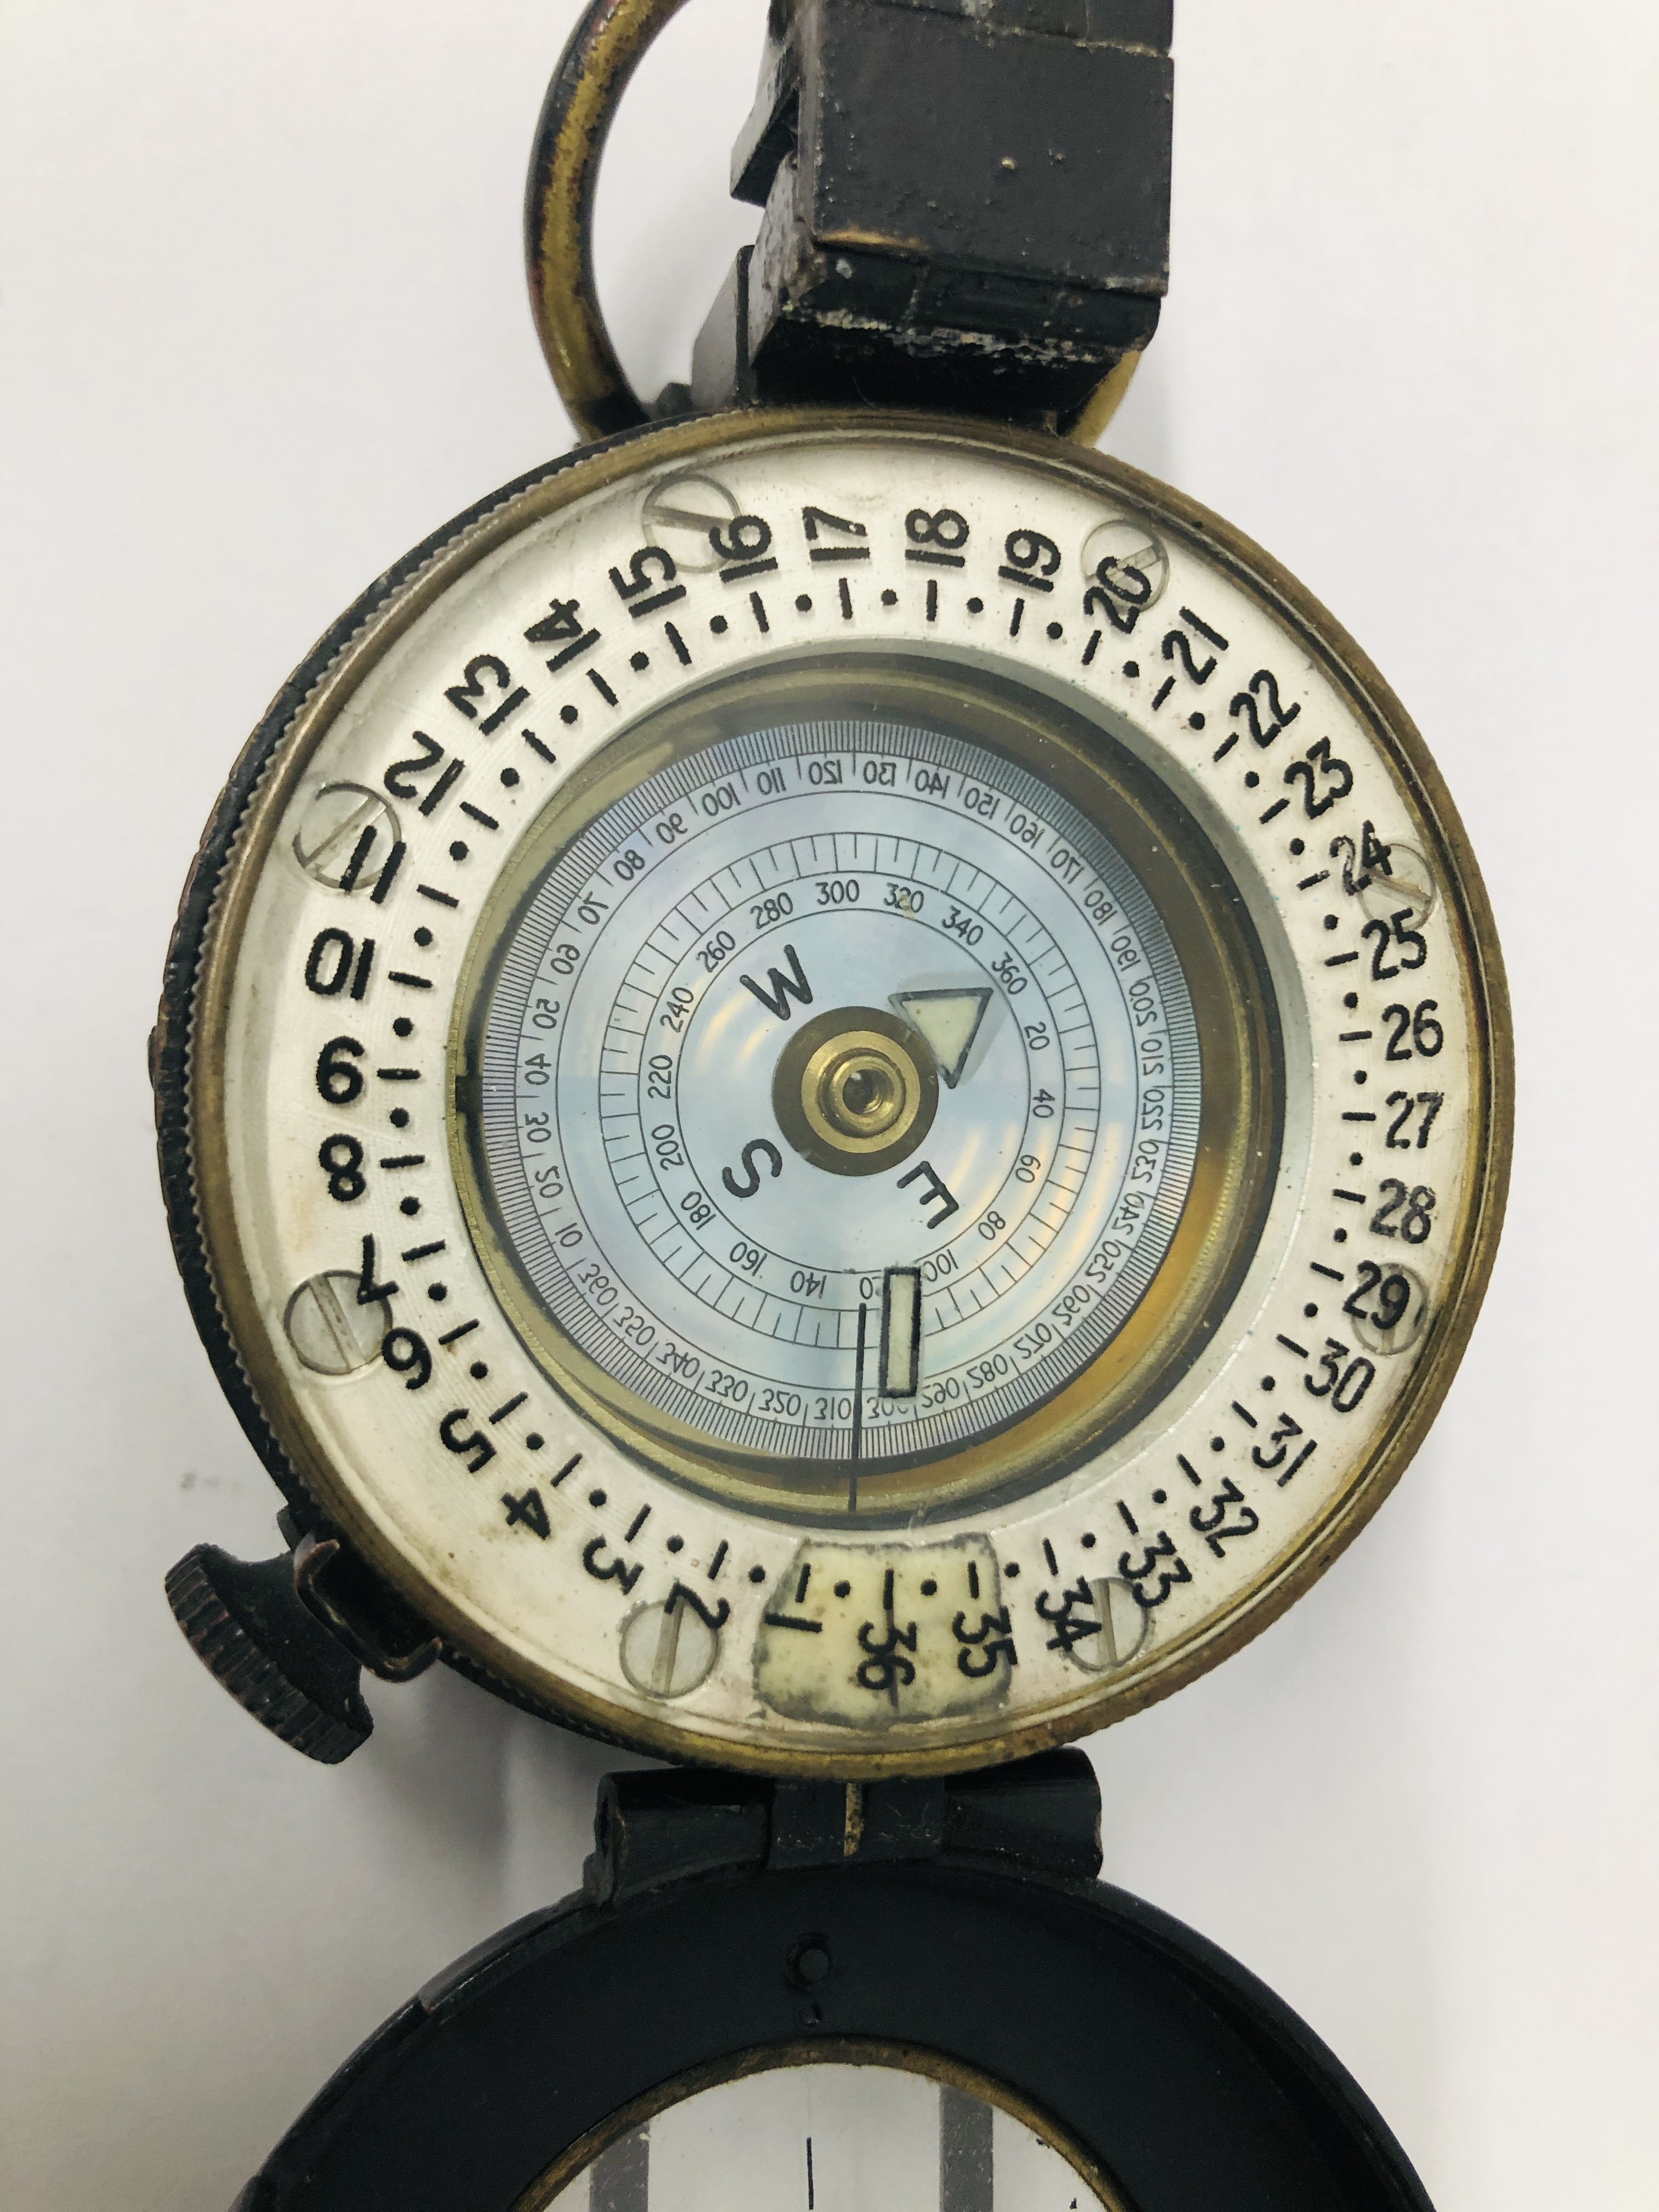 VINTAGE MILITARY COMPASS T.G. CO. LTD. LONDON DATED 1941 NO. - Image 4 of 8